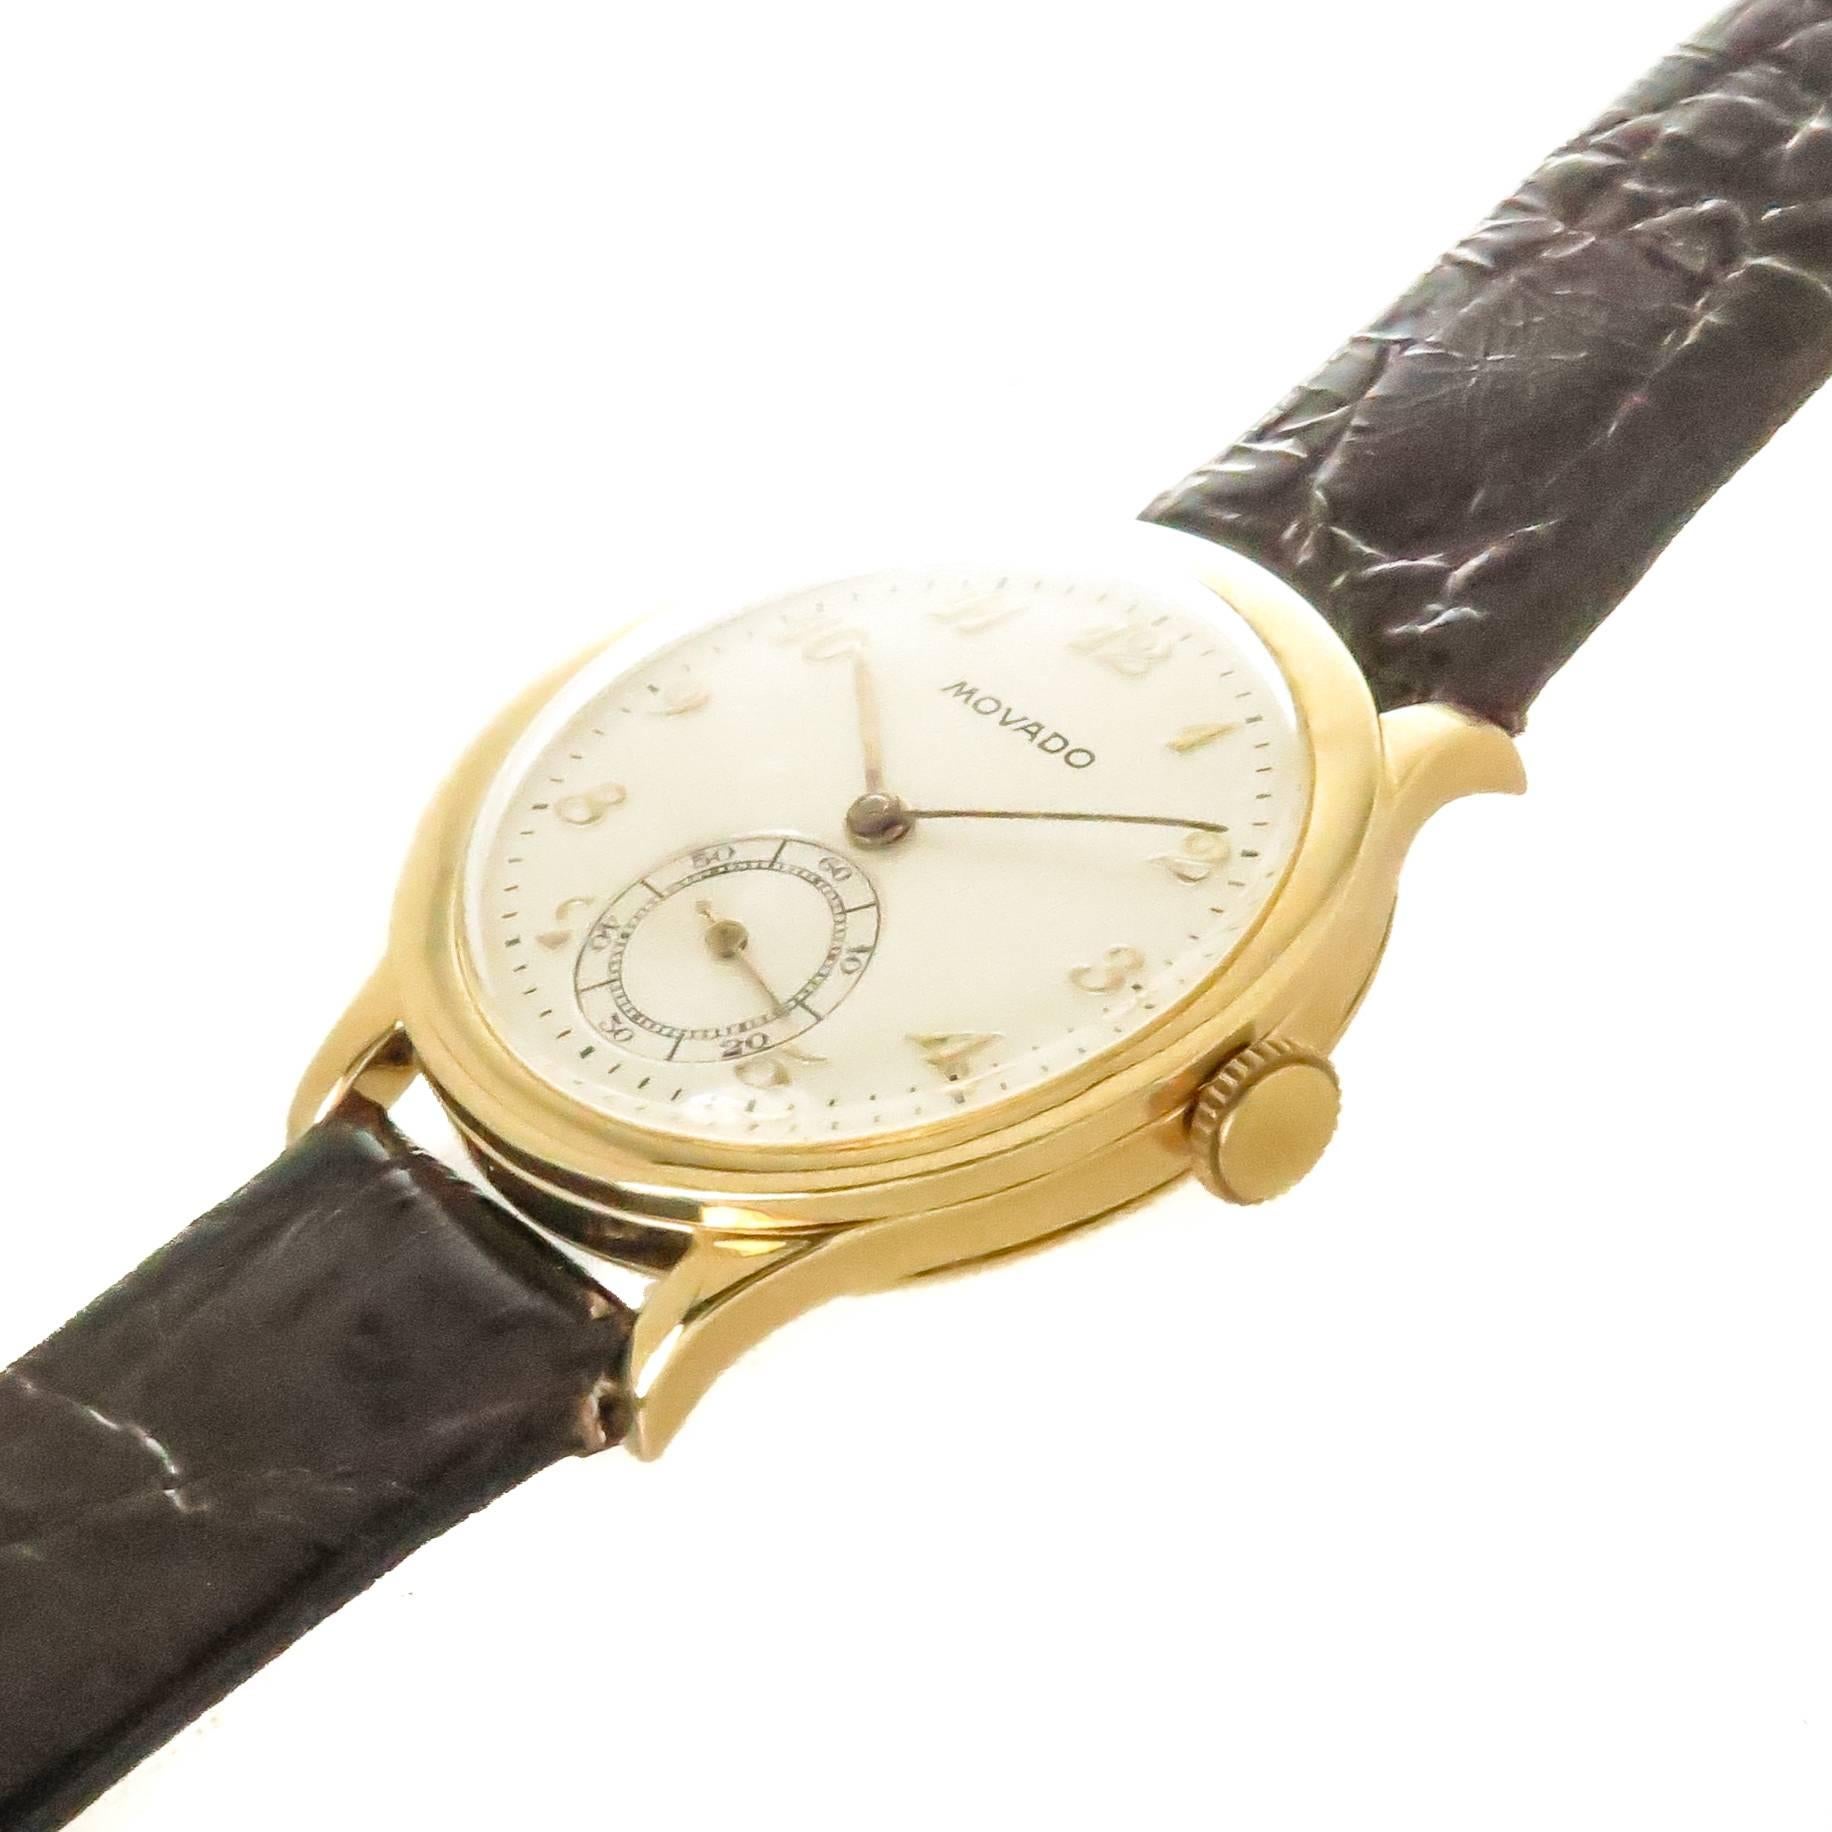 Circa 1940s Movado Wrist watch, 32 MM 3 Piece 18K yellow Gold Calatrava Case. 15 Jewel, Caliber 75, mechanical, manual wind Movement.  Silver White dial with raised Gold Markers and a sub seconds chapter. New Brown Crocodile Strap. Watch length 8